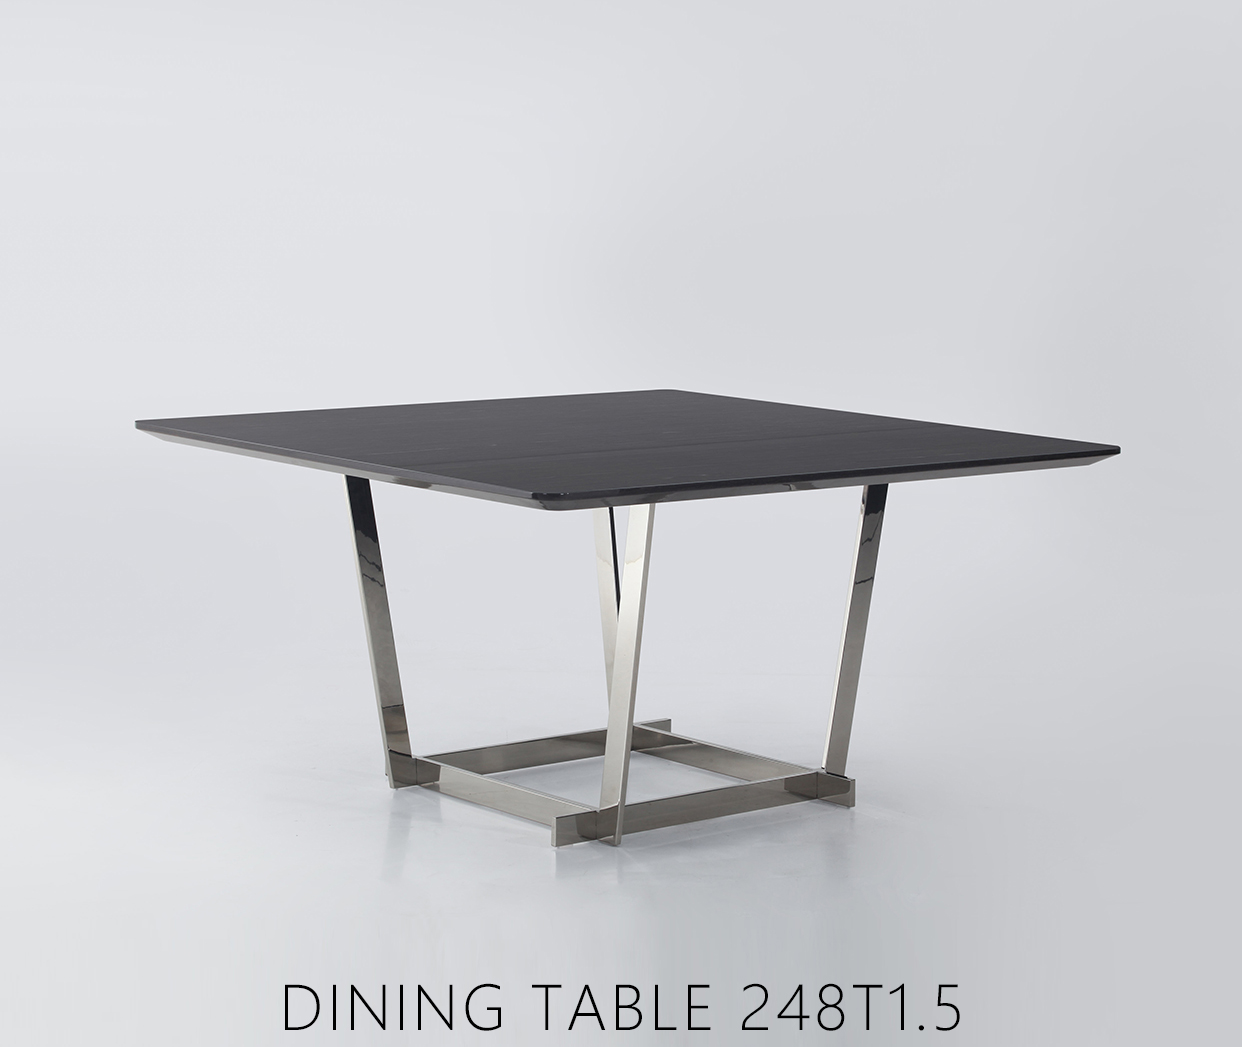 DINING TABLE 248T1.5 